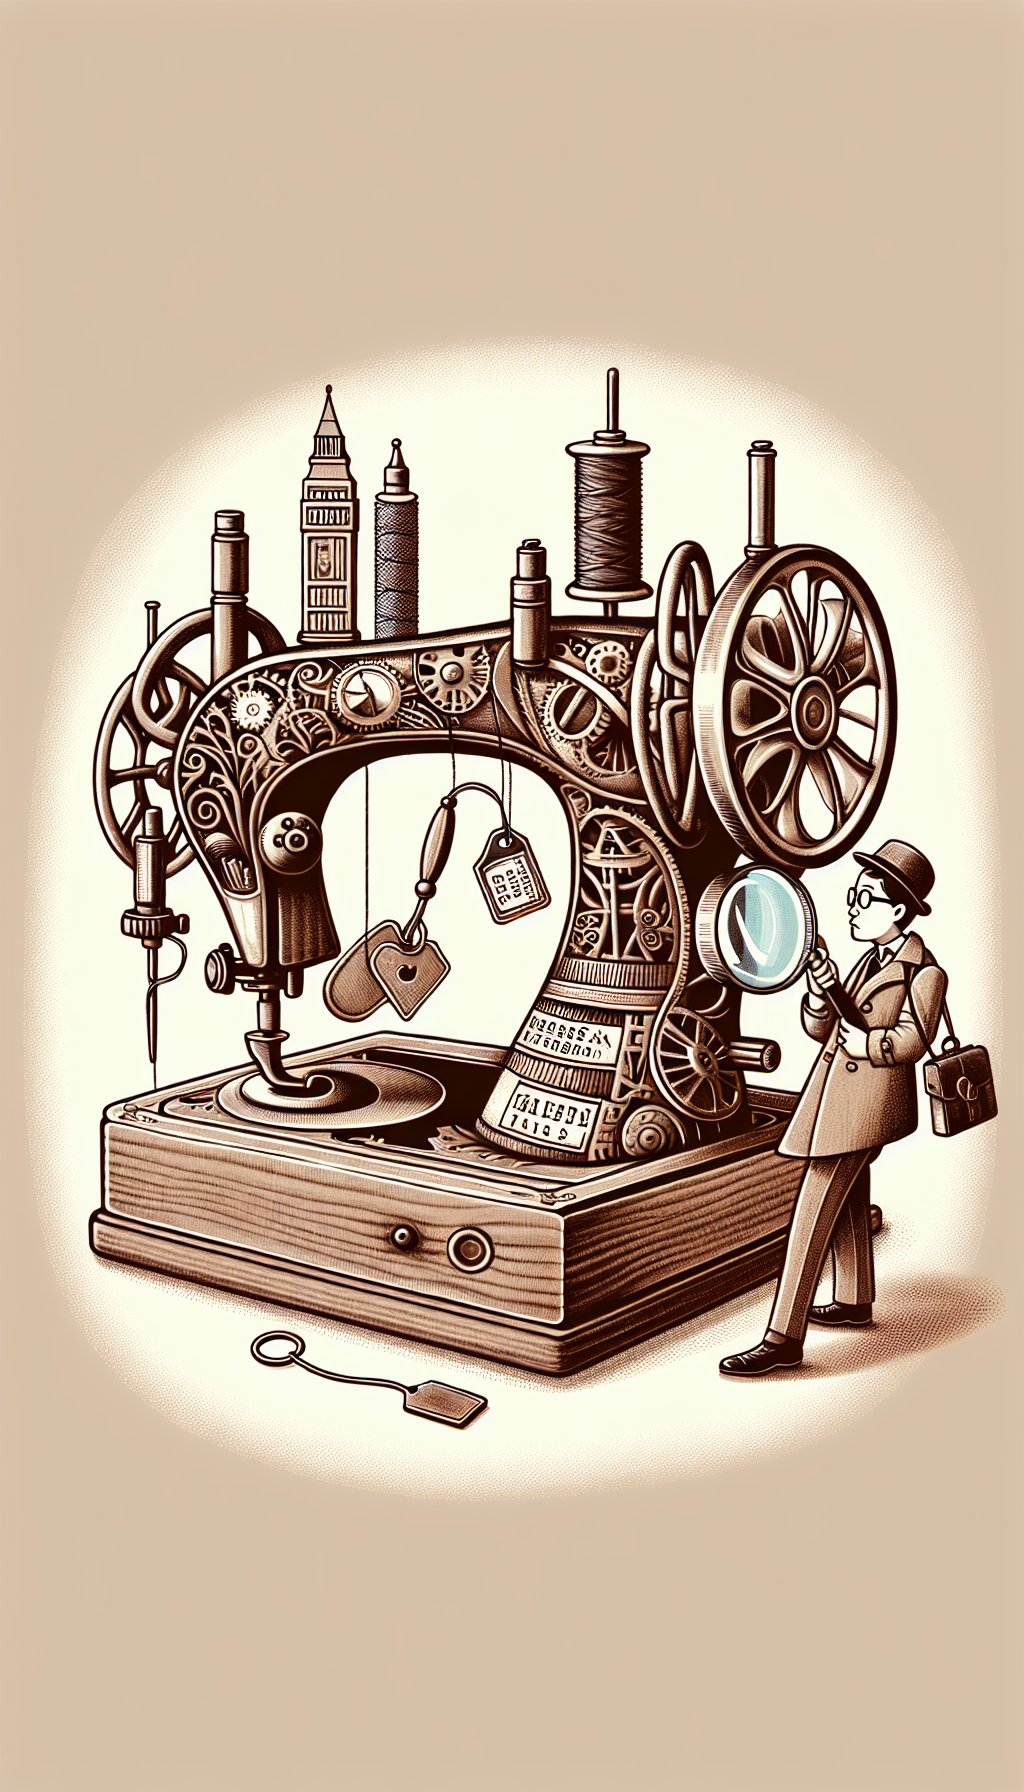 A whimsical, sepia-toned illustration depicts a detective with a magnifying glass closely examining a classic, ornate sewing machine. The machine's components subtly transform into historical landmarks, indicating its era, while price tags dangle from its spool pin and foot pedal, hinting at its value. The overall style is a playful blend of vintage and steampunk aesthetics.